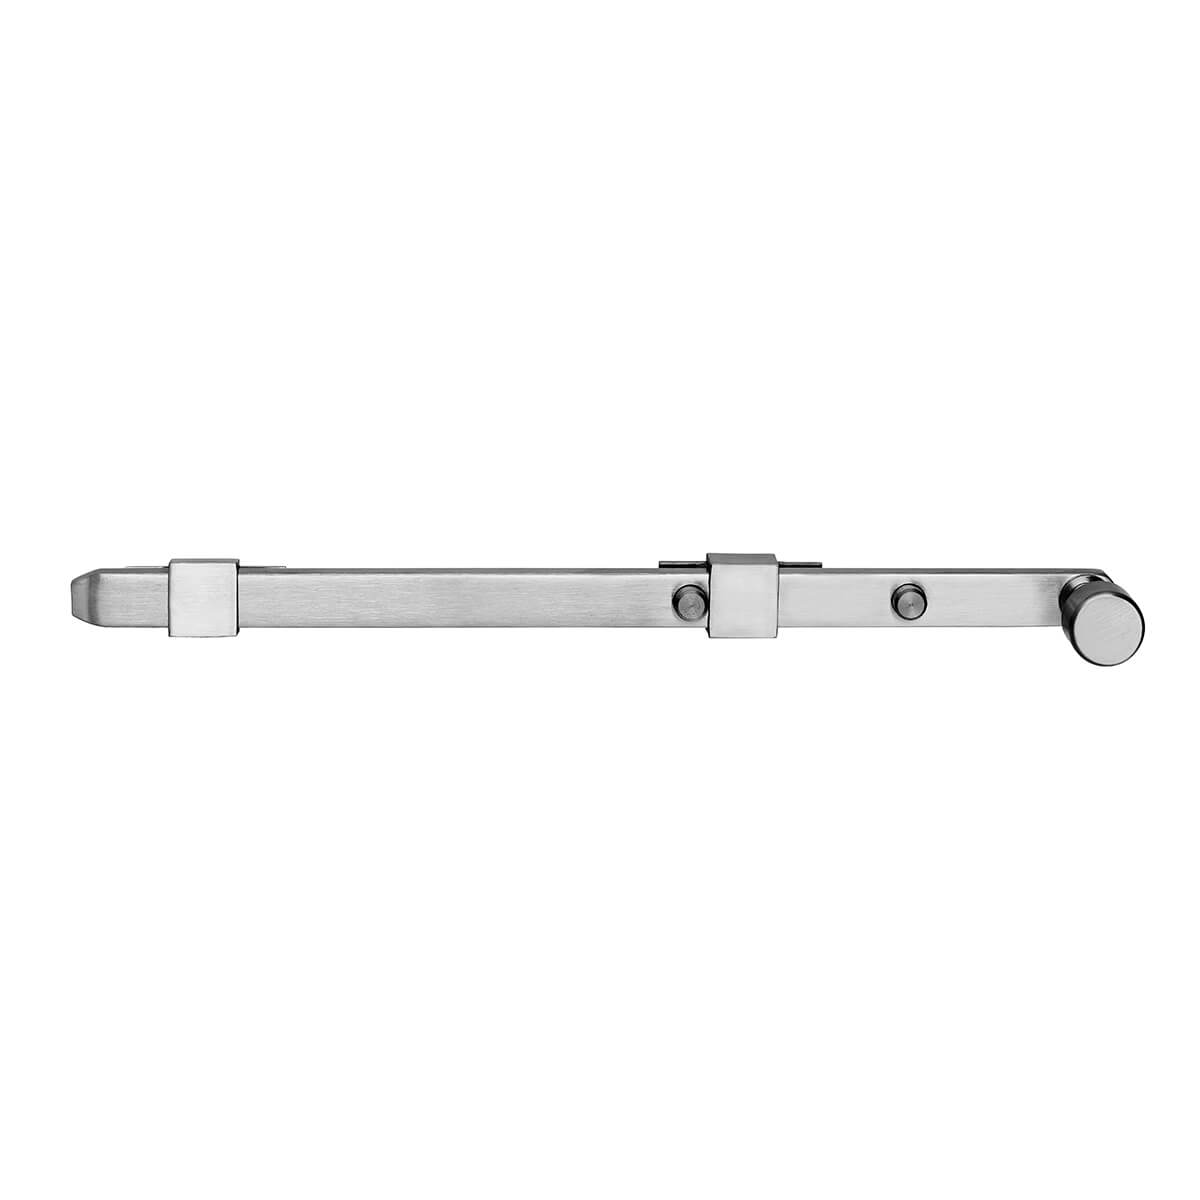 600mm Panic Bolt - Concealed Fix - Satin Stainless Steel